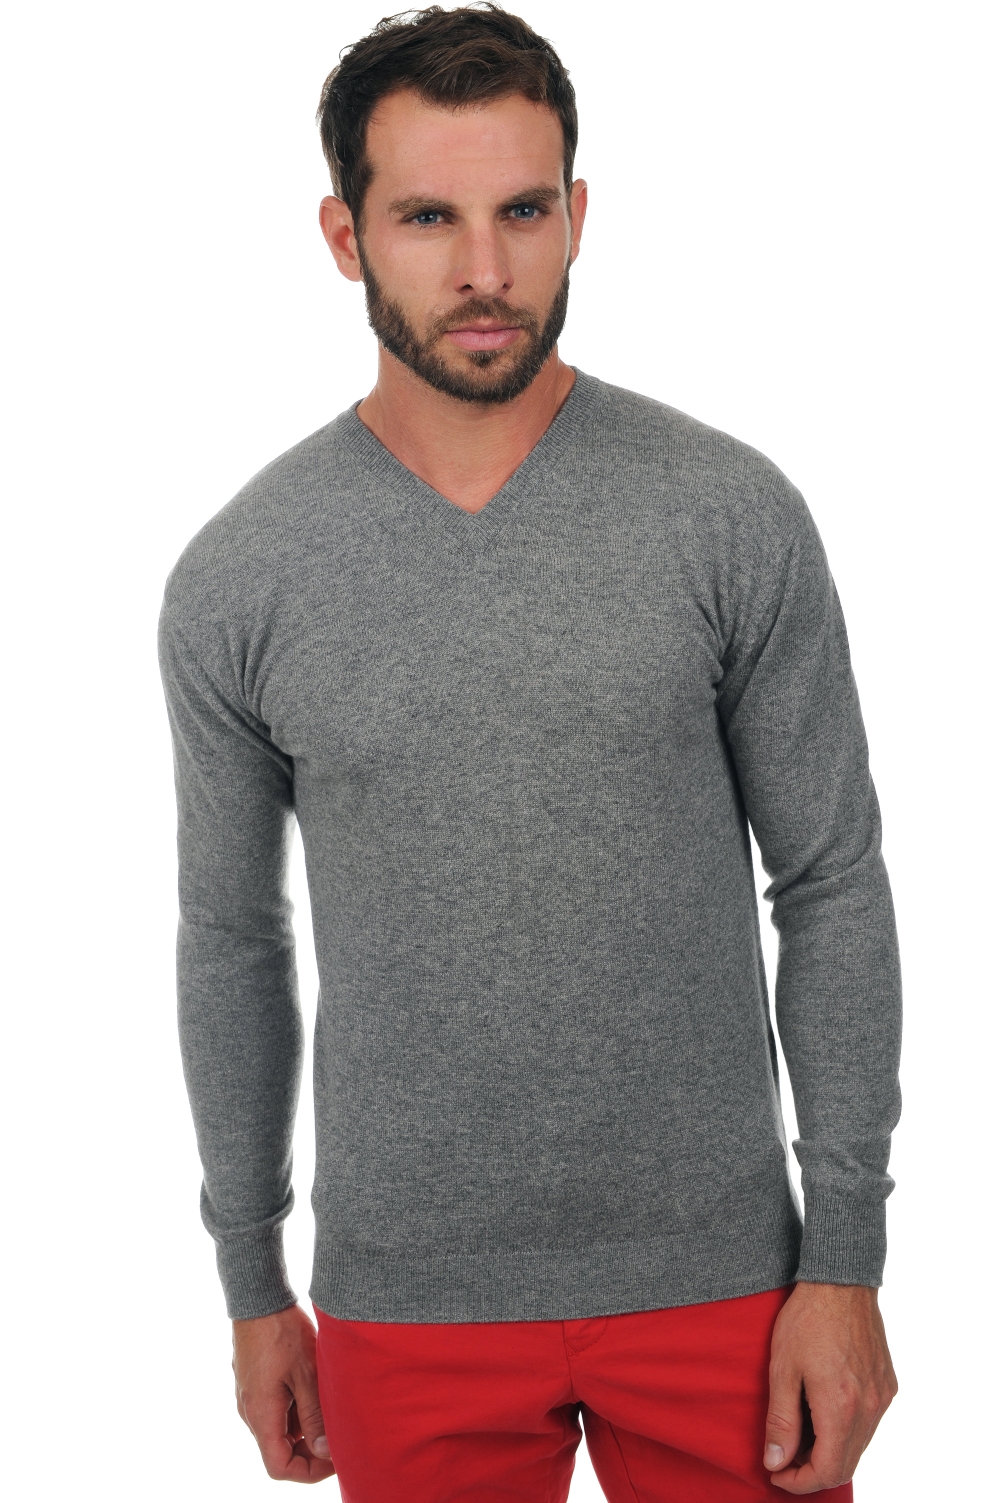 Cachemire pull homme col v maddox gris chine xl